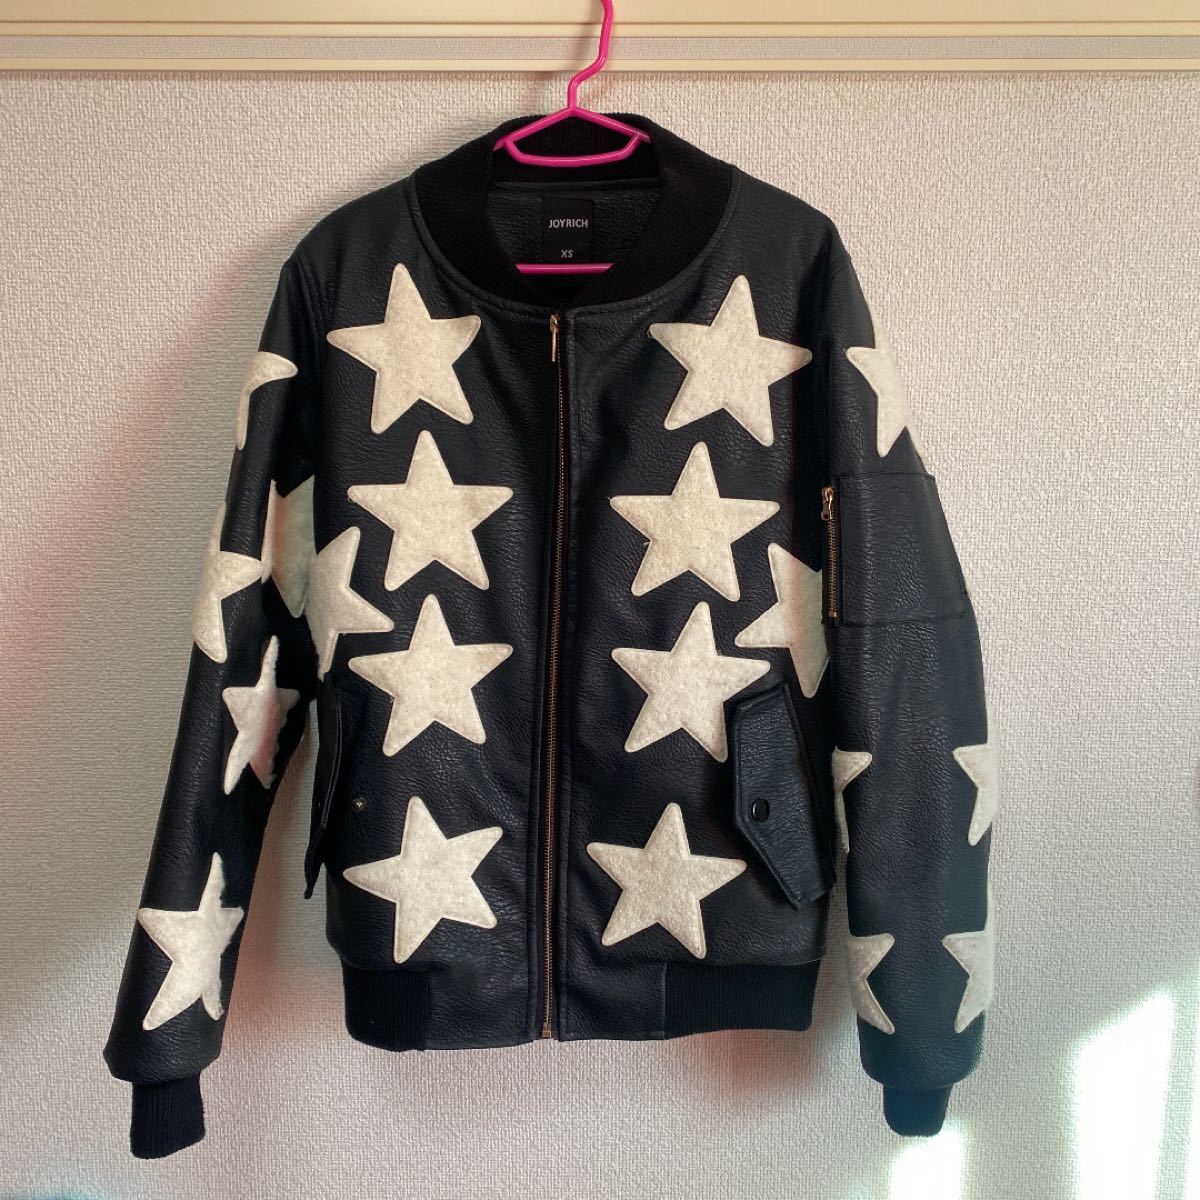 Joyrich（ジョイリッチ） All Star Patched Jacket-